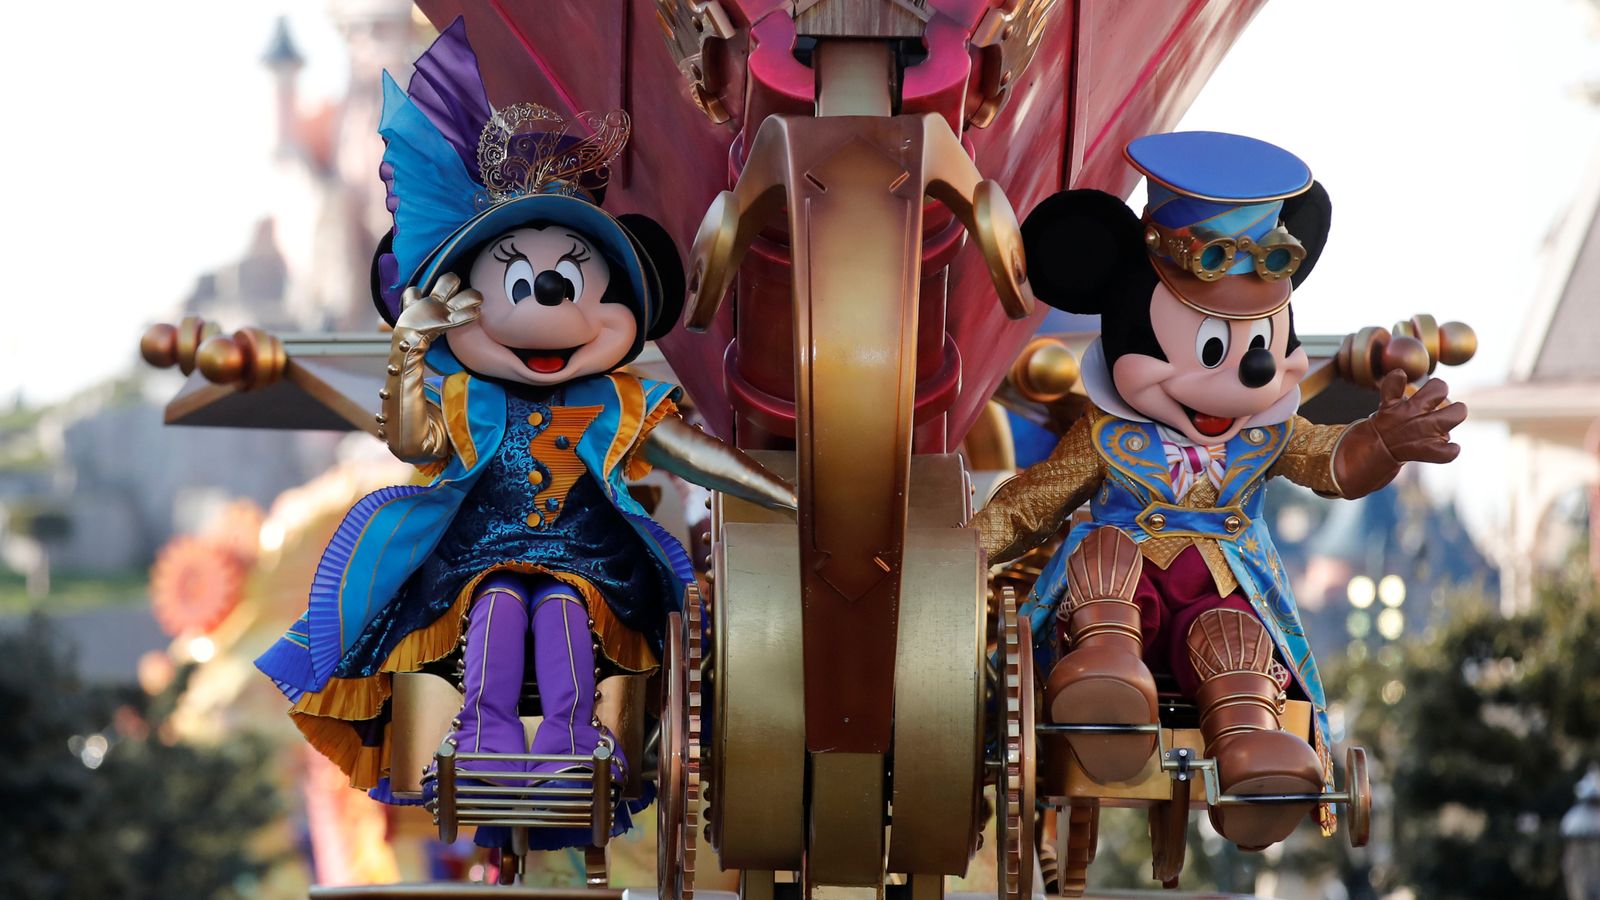 Disneyland: Performers who bring characters such as Mickey Mouse and Snow White to life form Magic United union